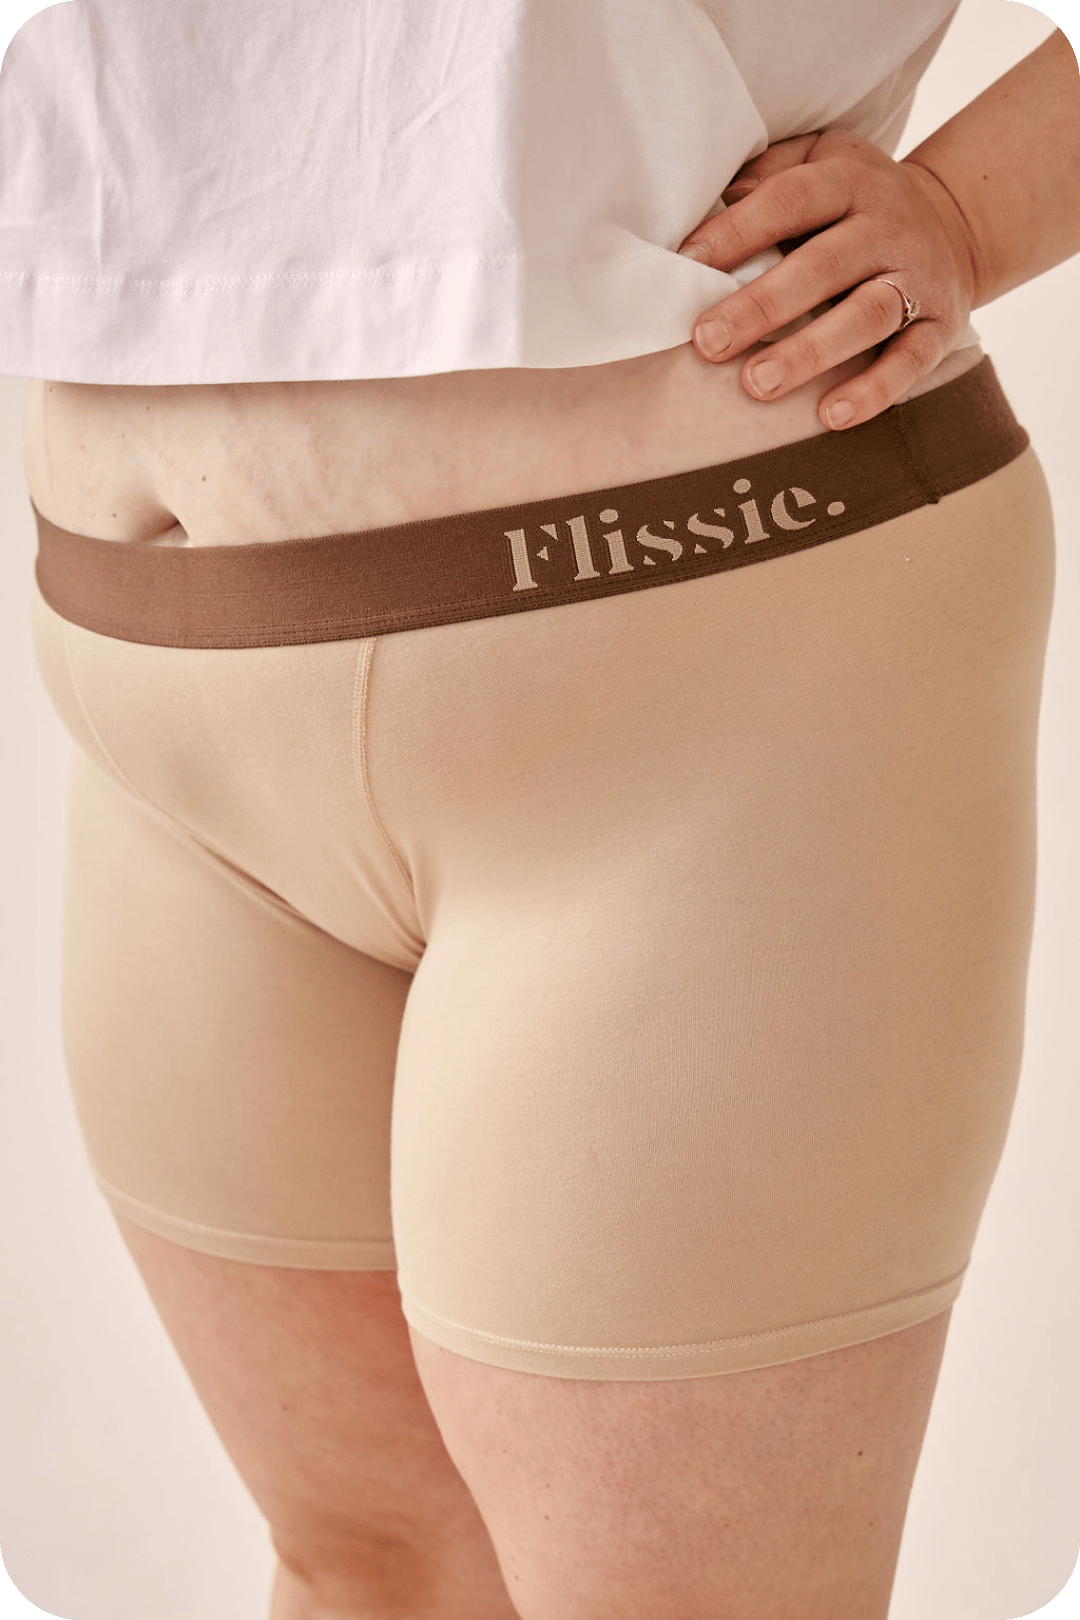 Rab Forge Women's Boxers